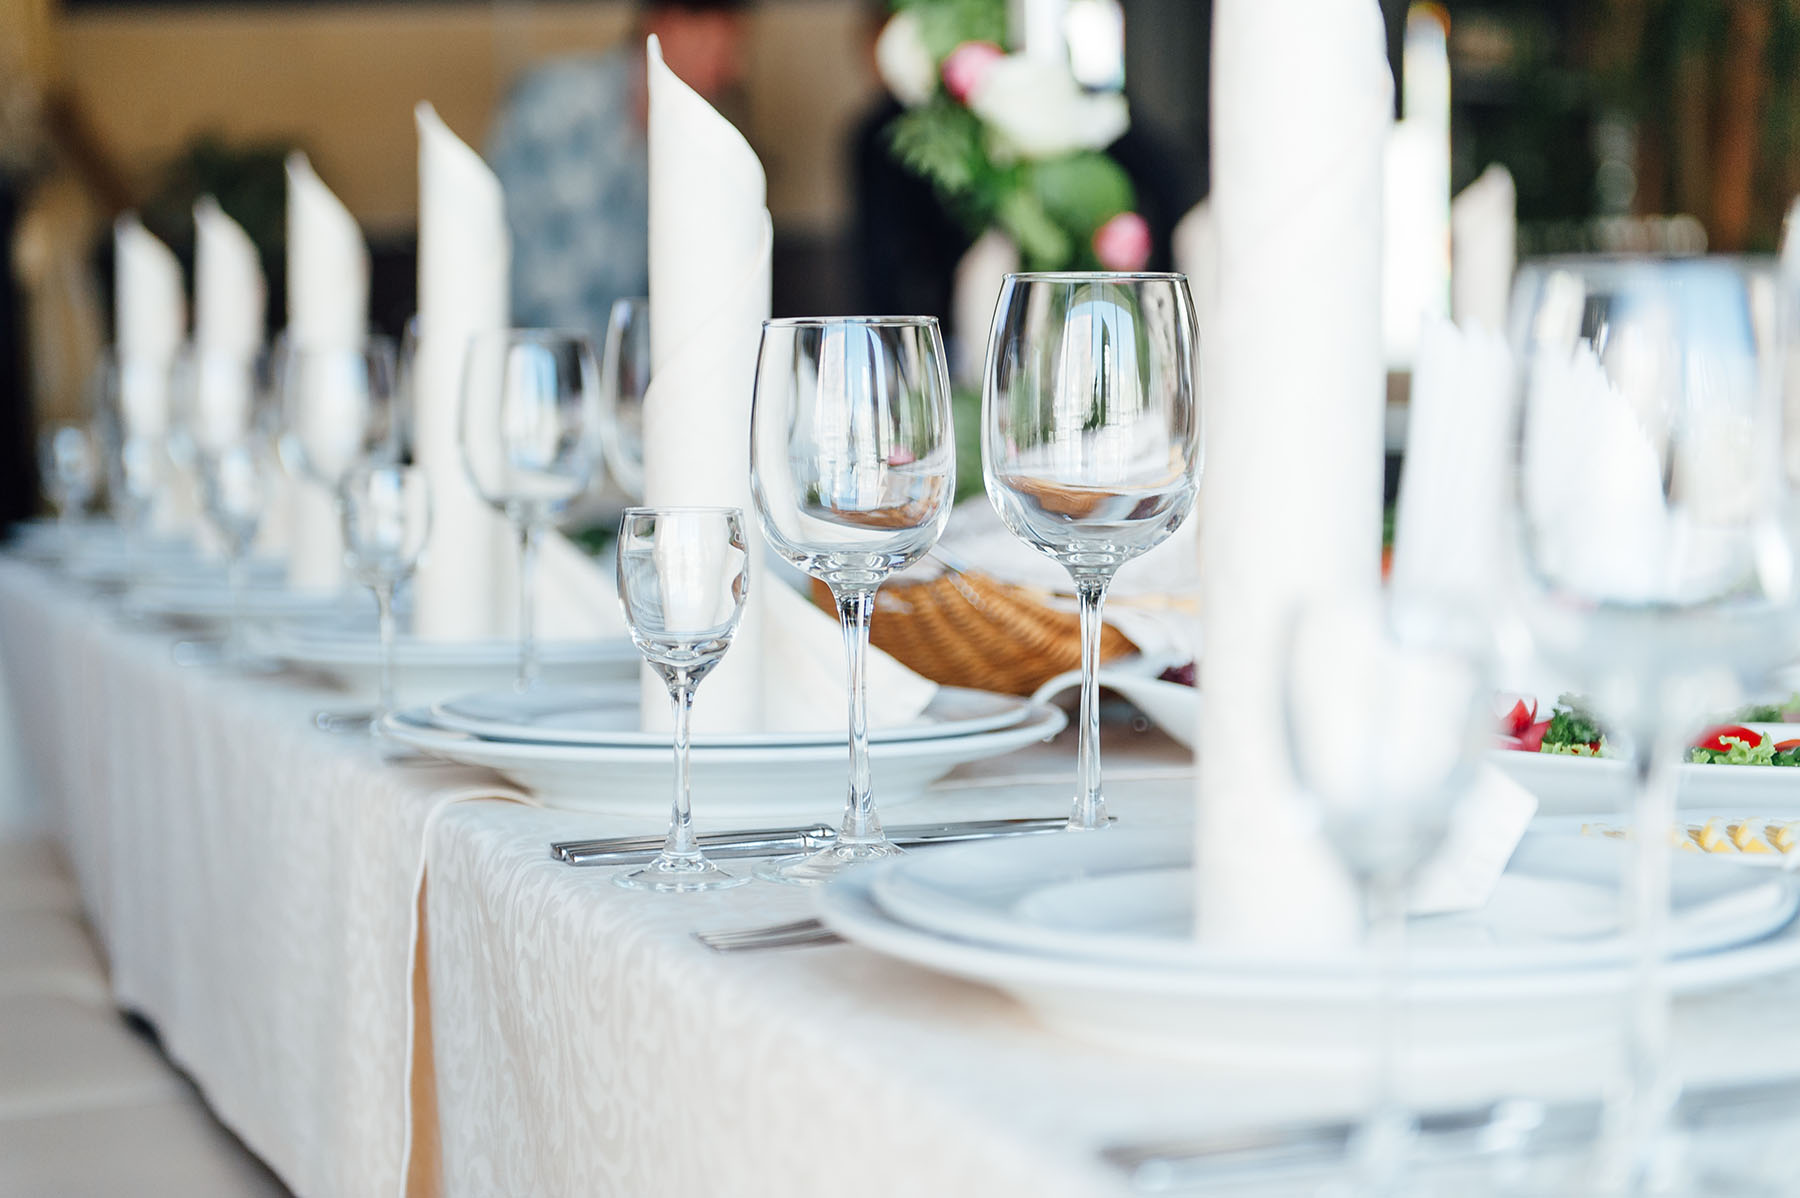 https://www.linenservicealbany.com/images/linen_services_albany_ny_restaurants-tablecloths_napkins_02.jpg?crc=3869965483